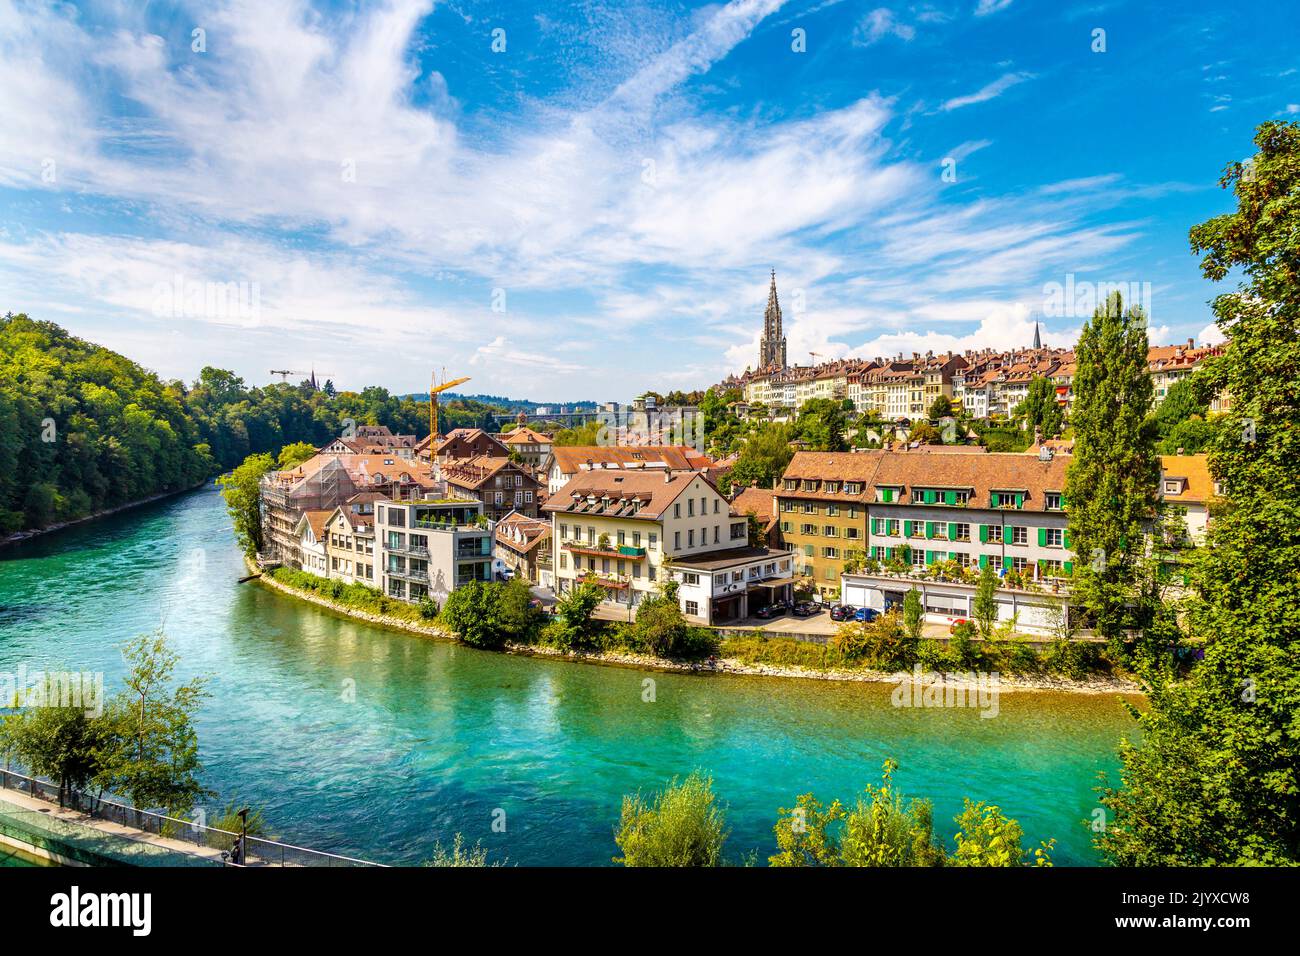 View of the Schwarzes Quartier and River Aare in the city of Bern, Switzerland Stock Photo